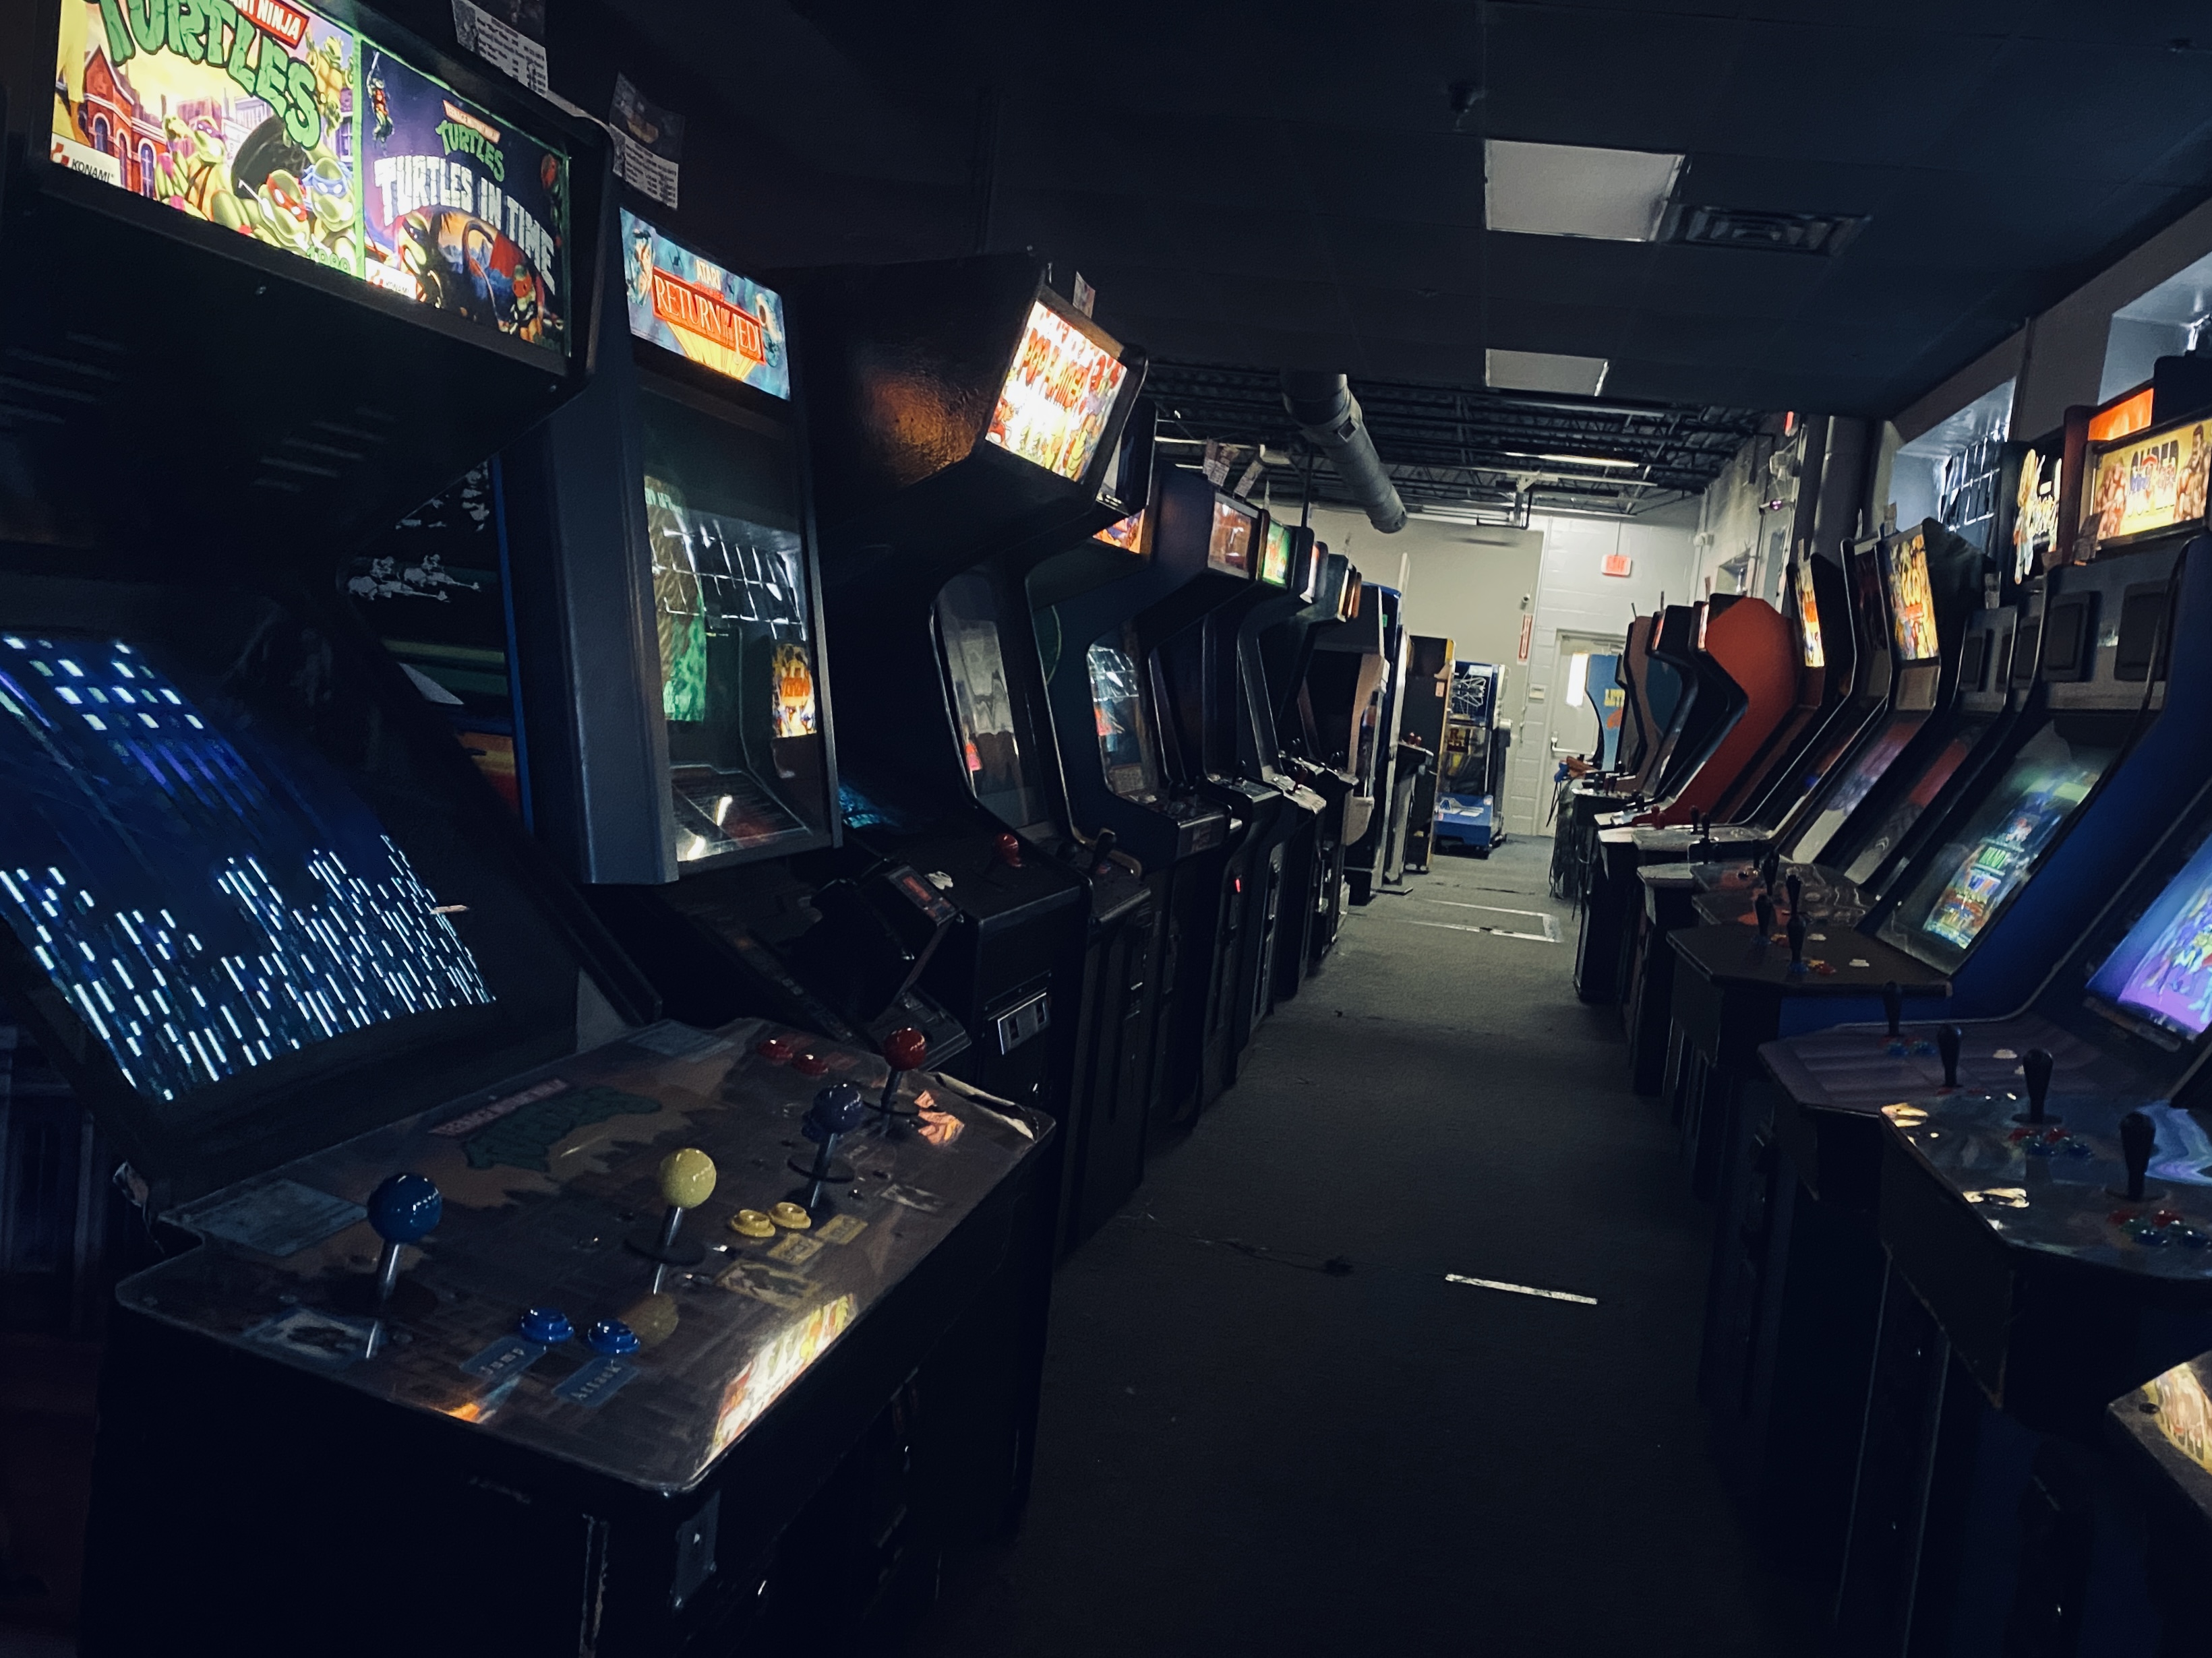 An empty, darkened aisle lined with vintage video game cabinets